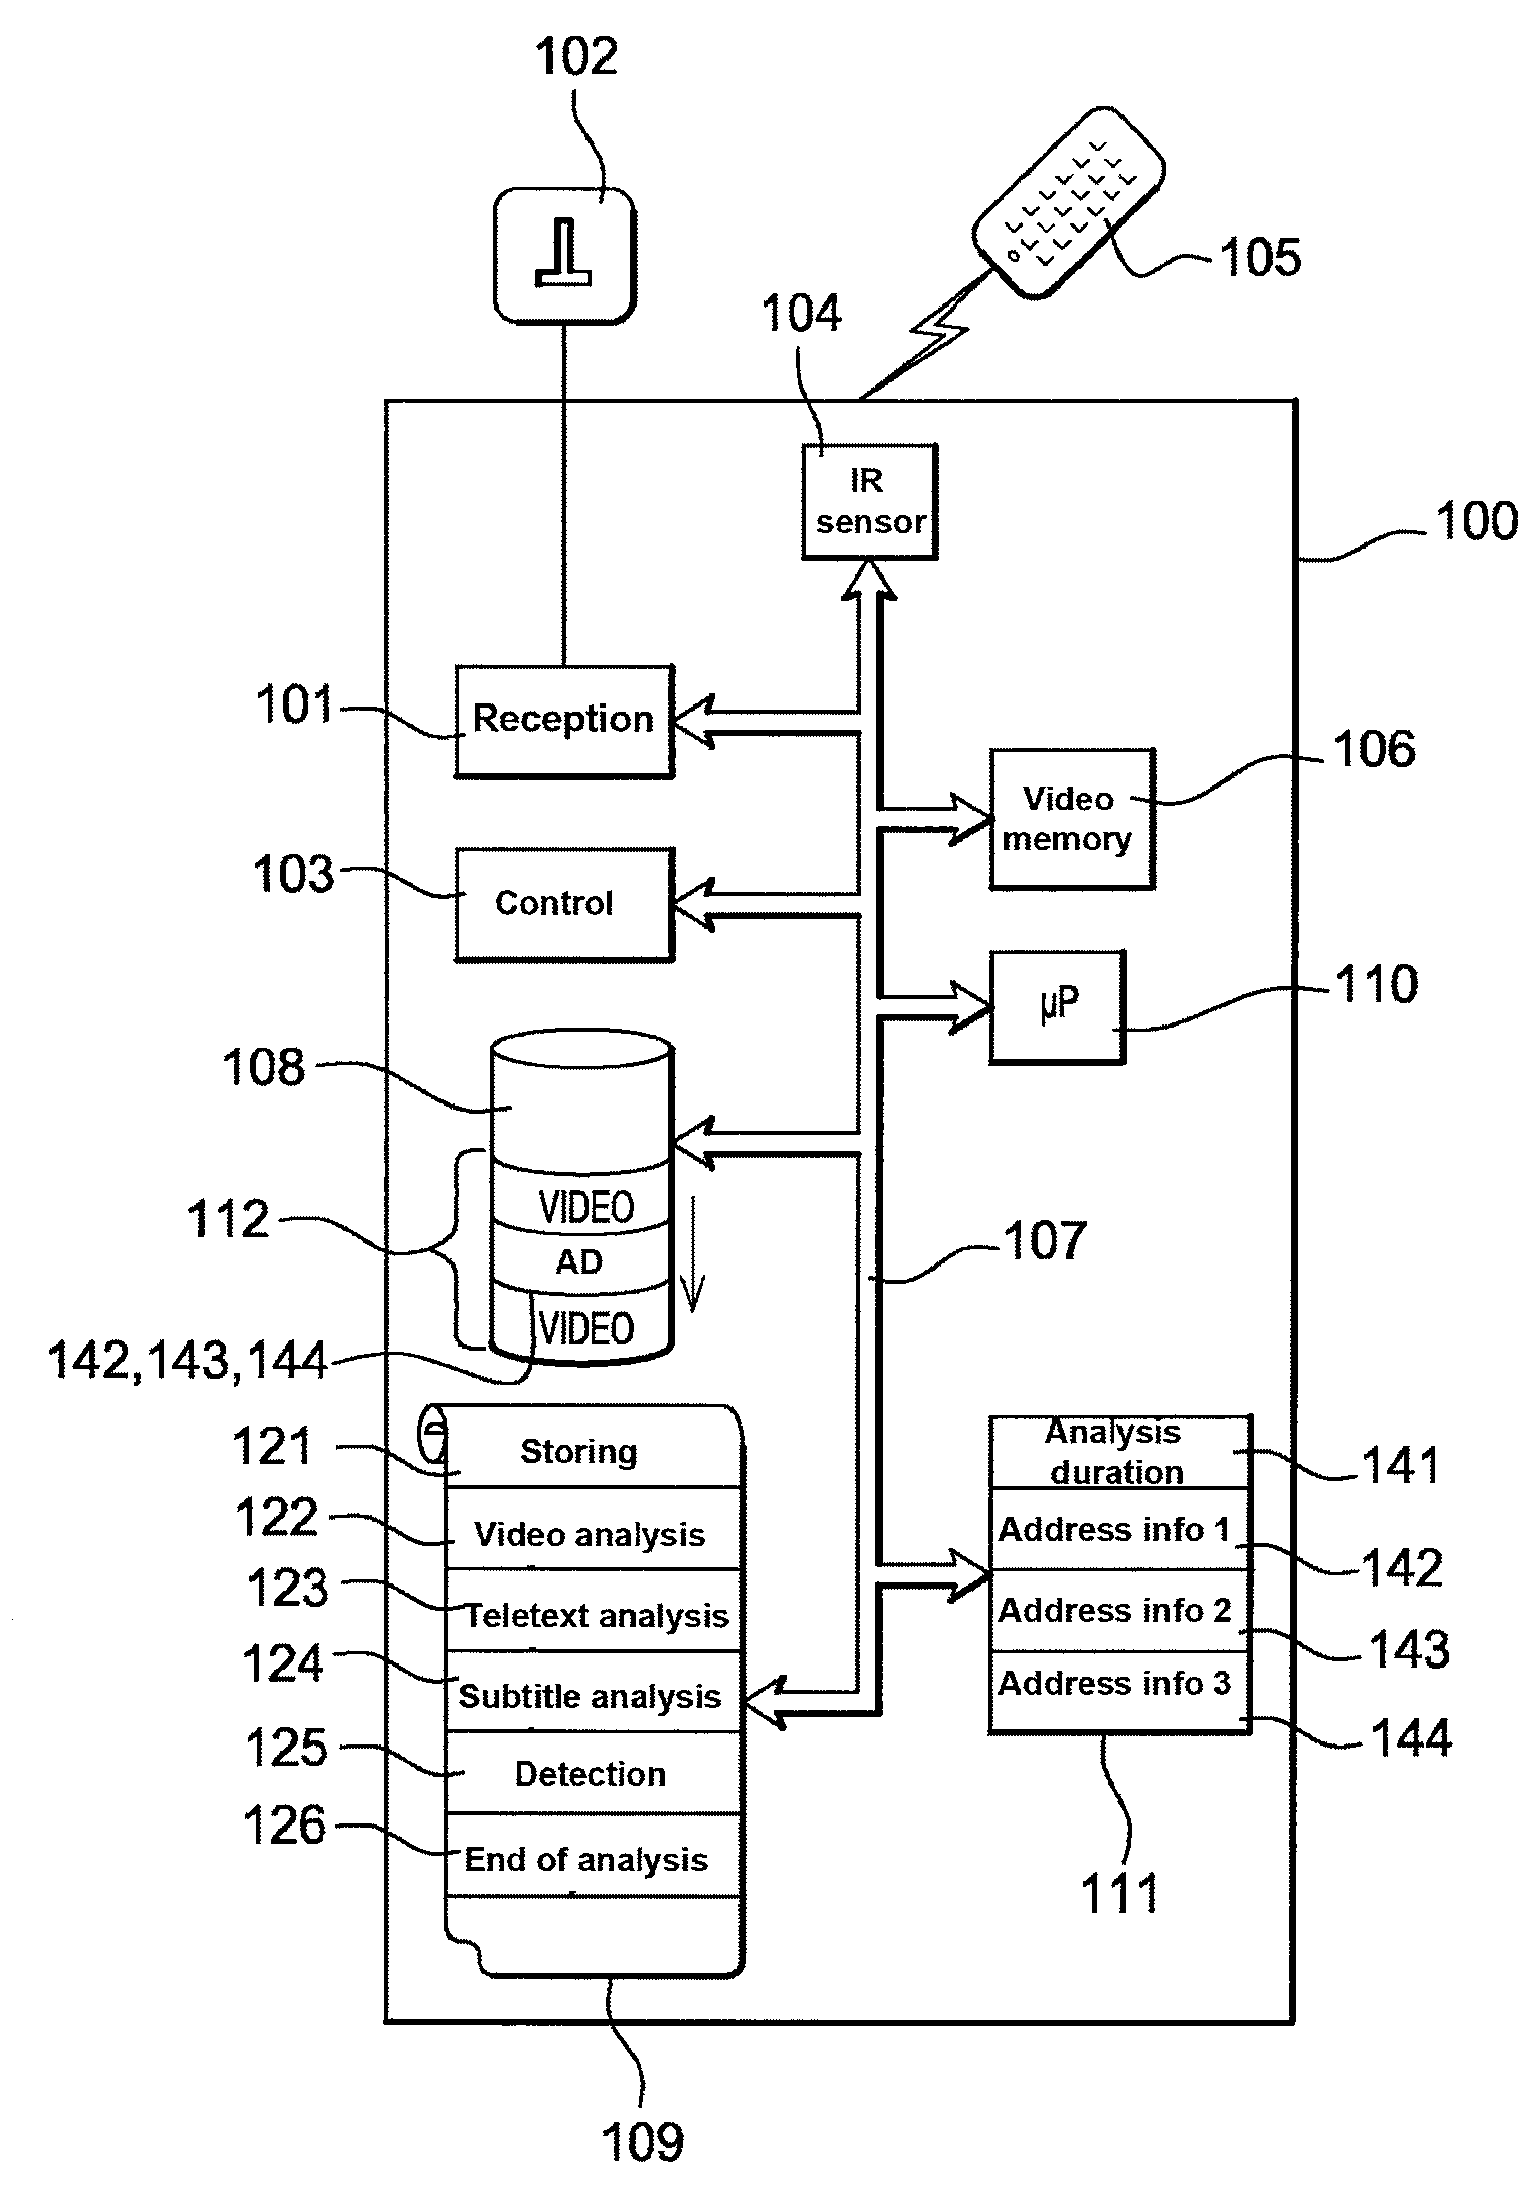 Method for managing advertising detection in an electronic apparatus, such as a digital television decoder